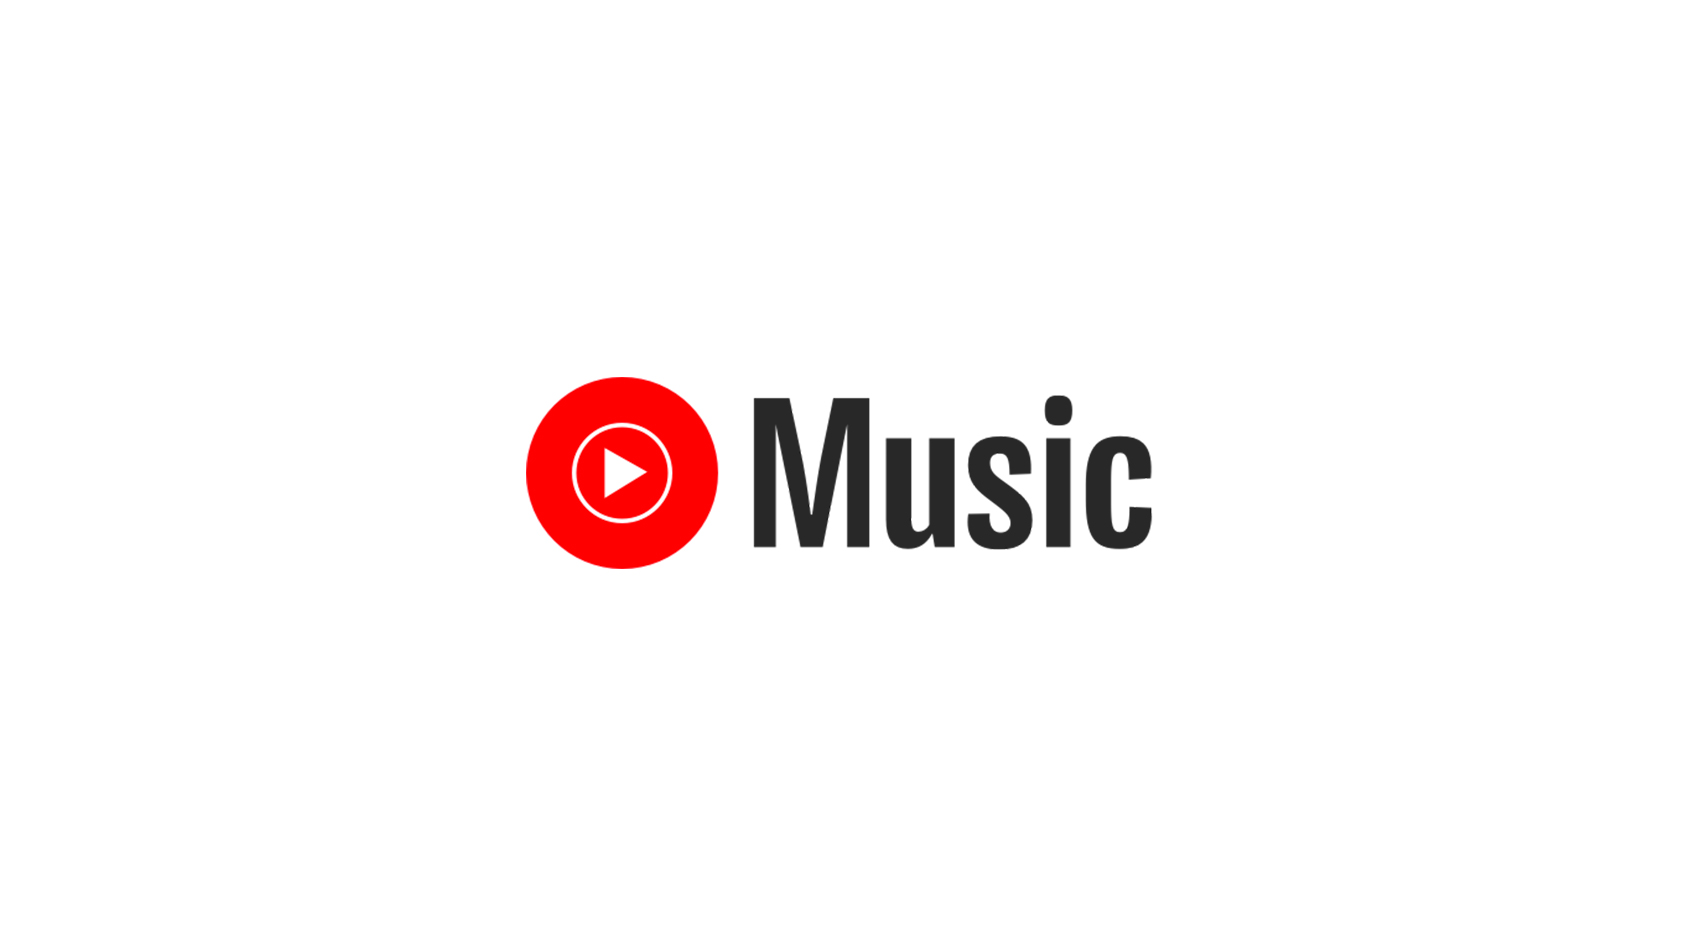 The YouTube Music logo against a white background.